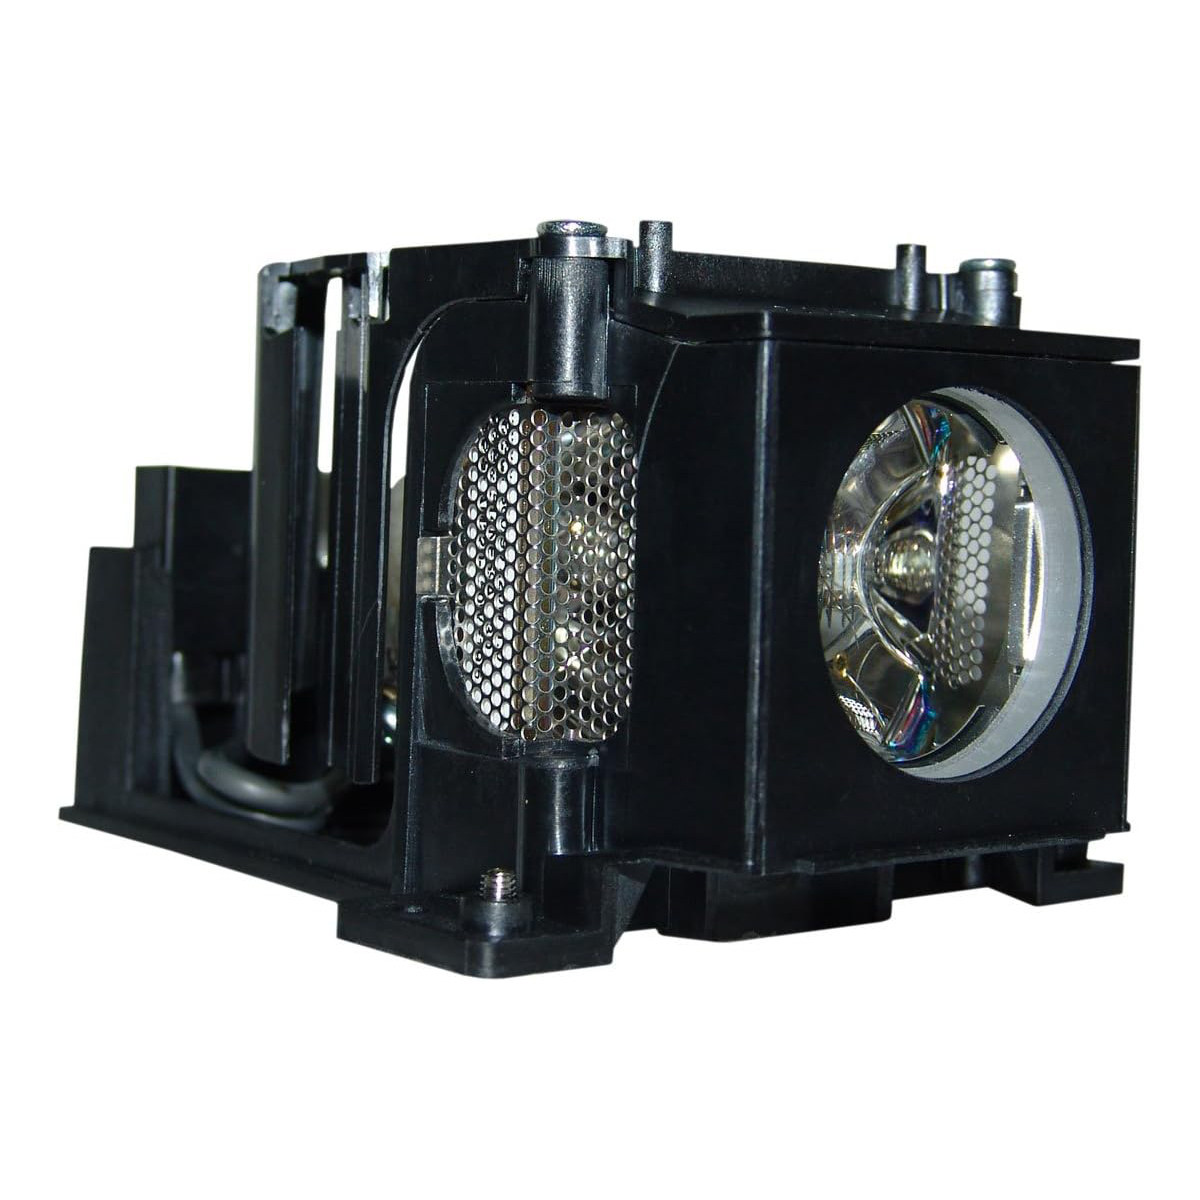 Replacement Projector lamp POA-LMP107 For Sanyo PLC-XE32 PLC-XW50 PLC-XW55 PLC-XW56